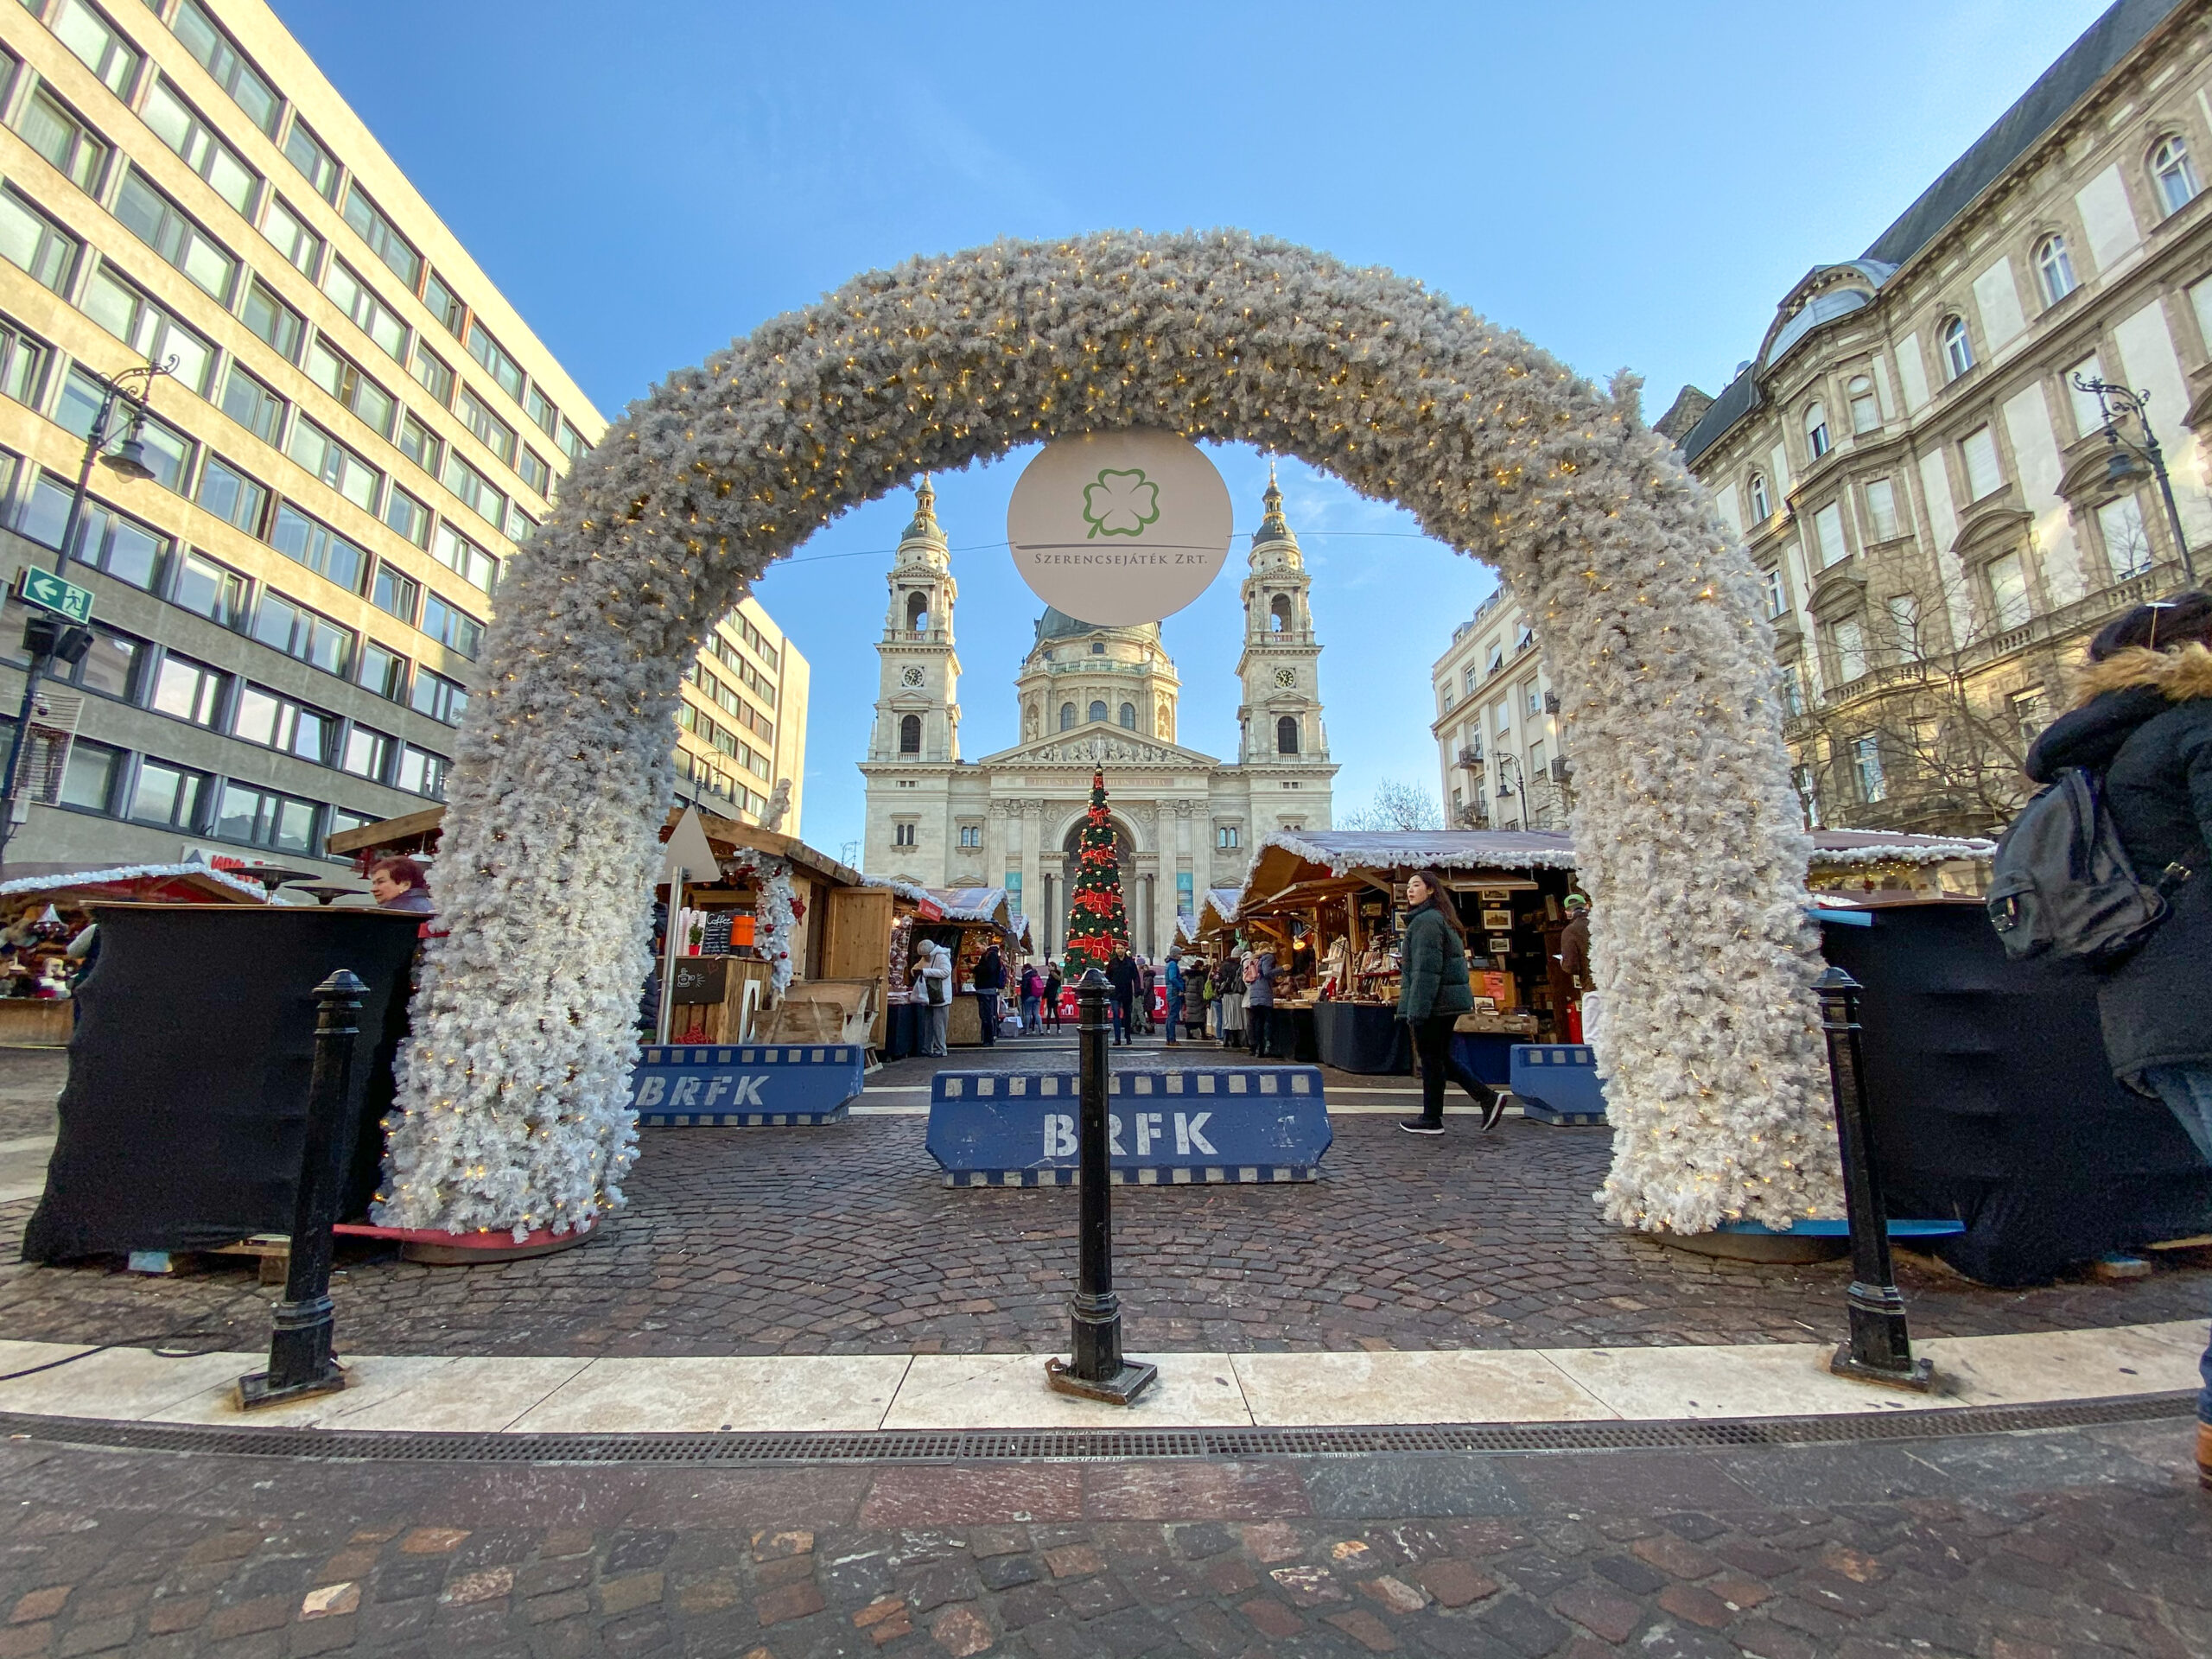 Charming gate at the entrance of the Christmas market at St. Stephen's Basilica